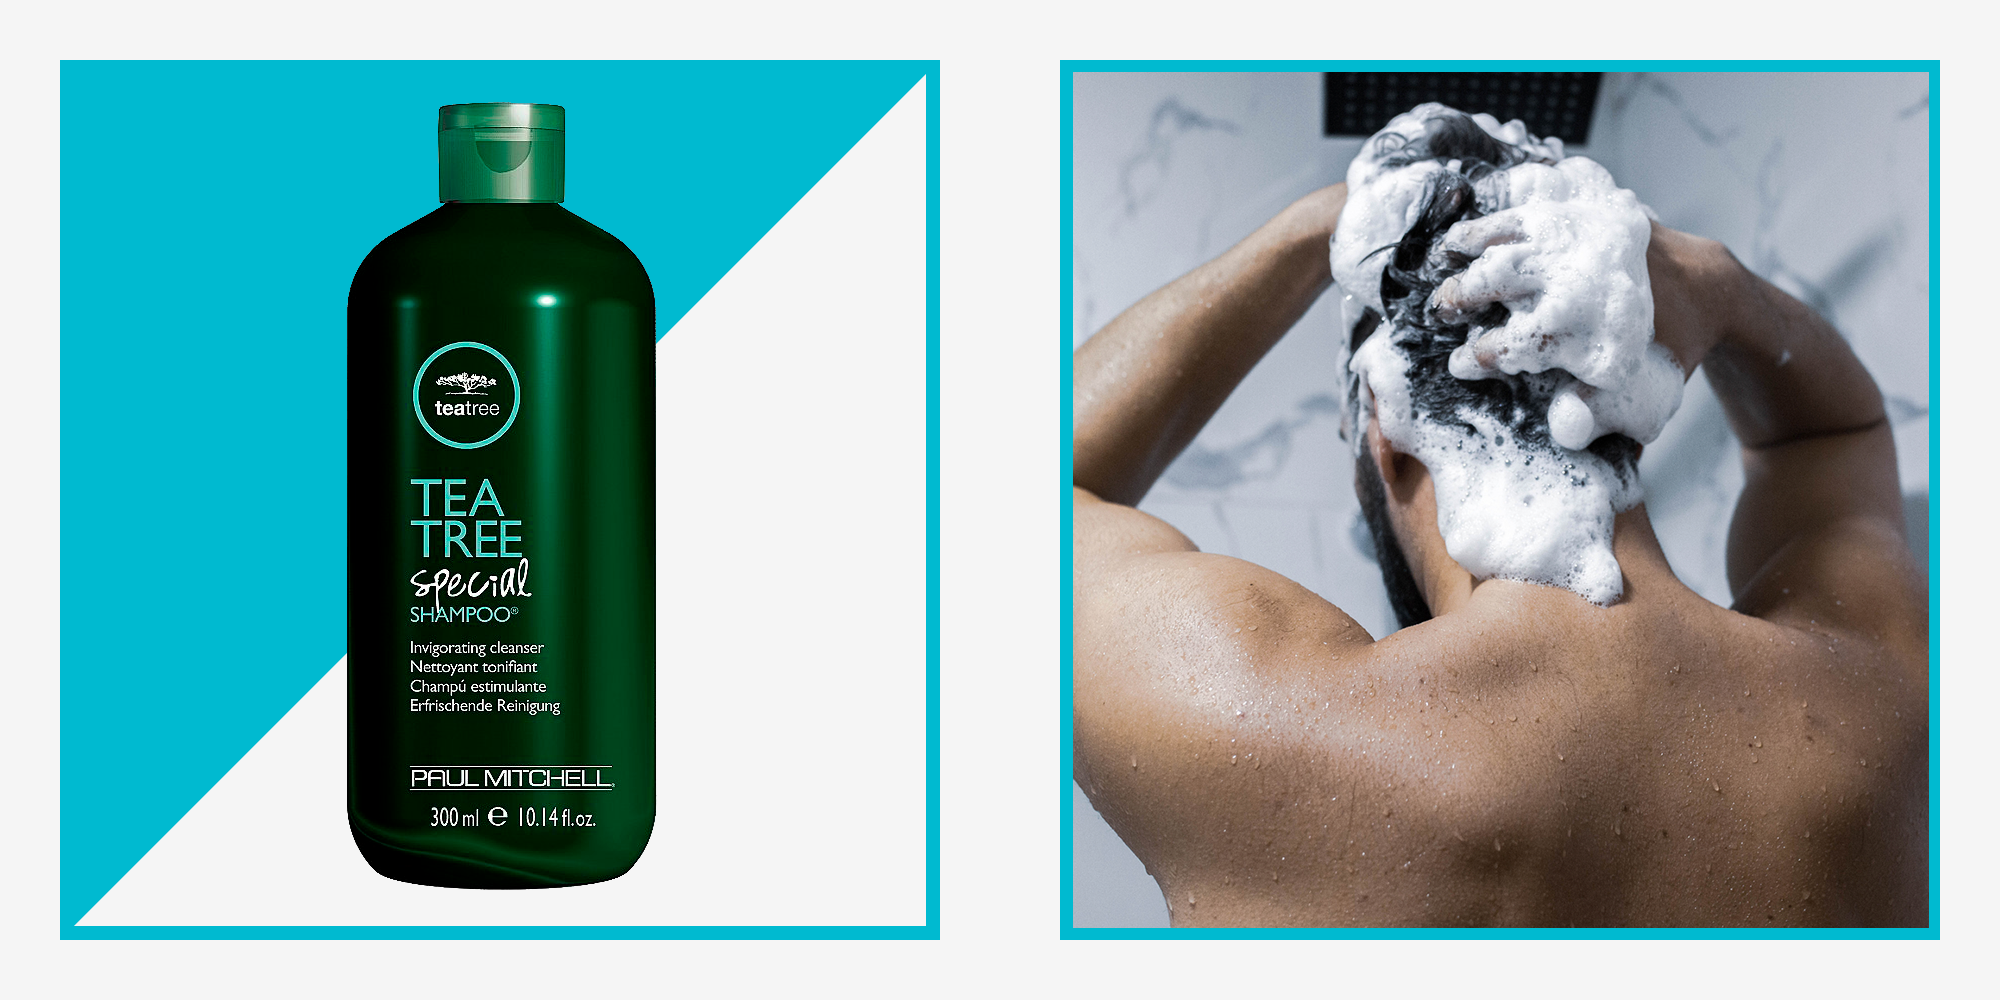 The 14 Best Thickening Shampoos For Men, Tested by Doctors